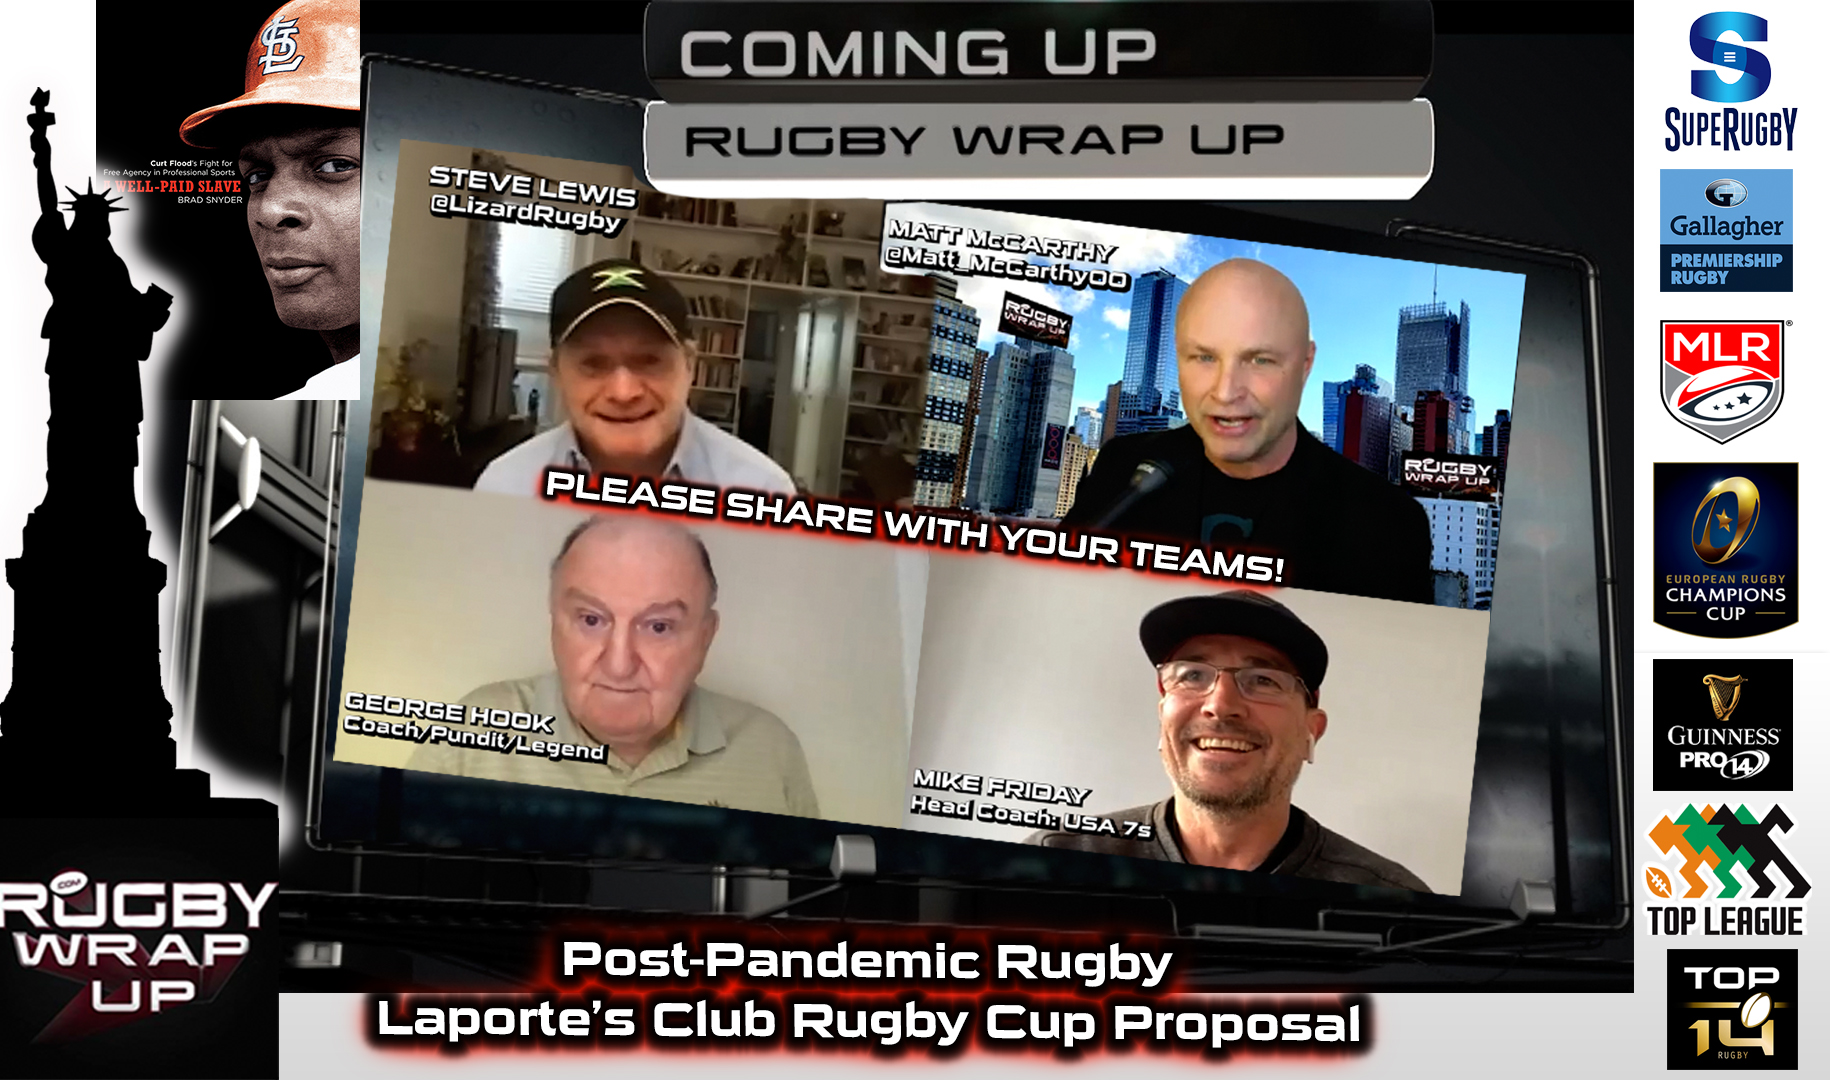 Mike_Friday, George_Hook, Steve_Lewis, Johnathan Wicklow Barberie, Rugby_Wrap_Up, Bernard_Laporte